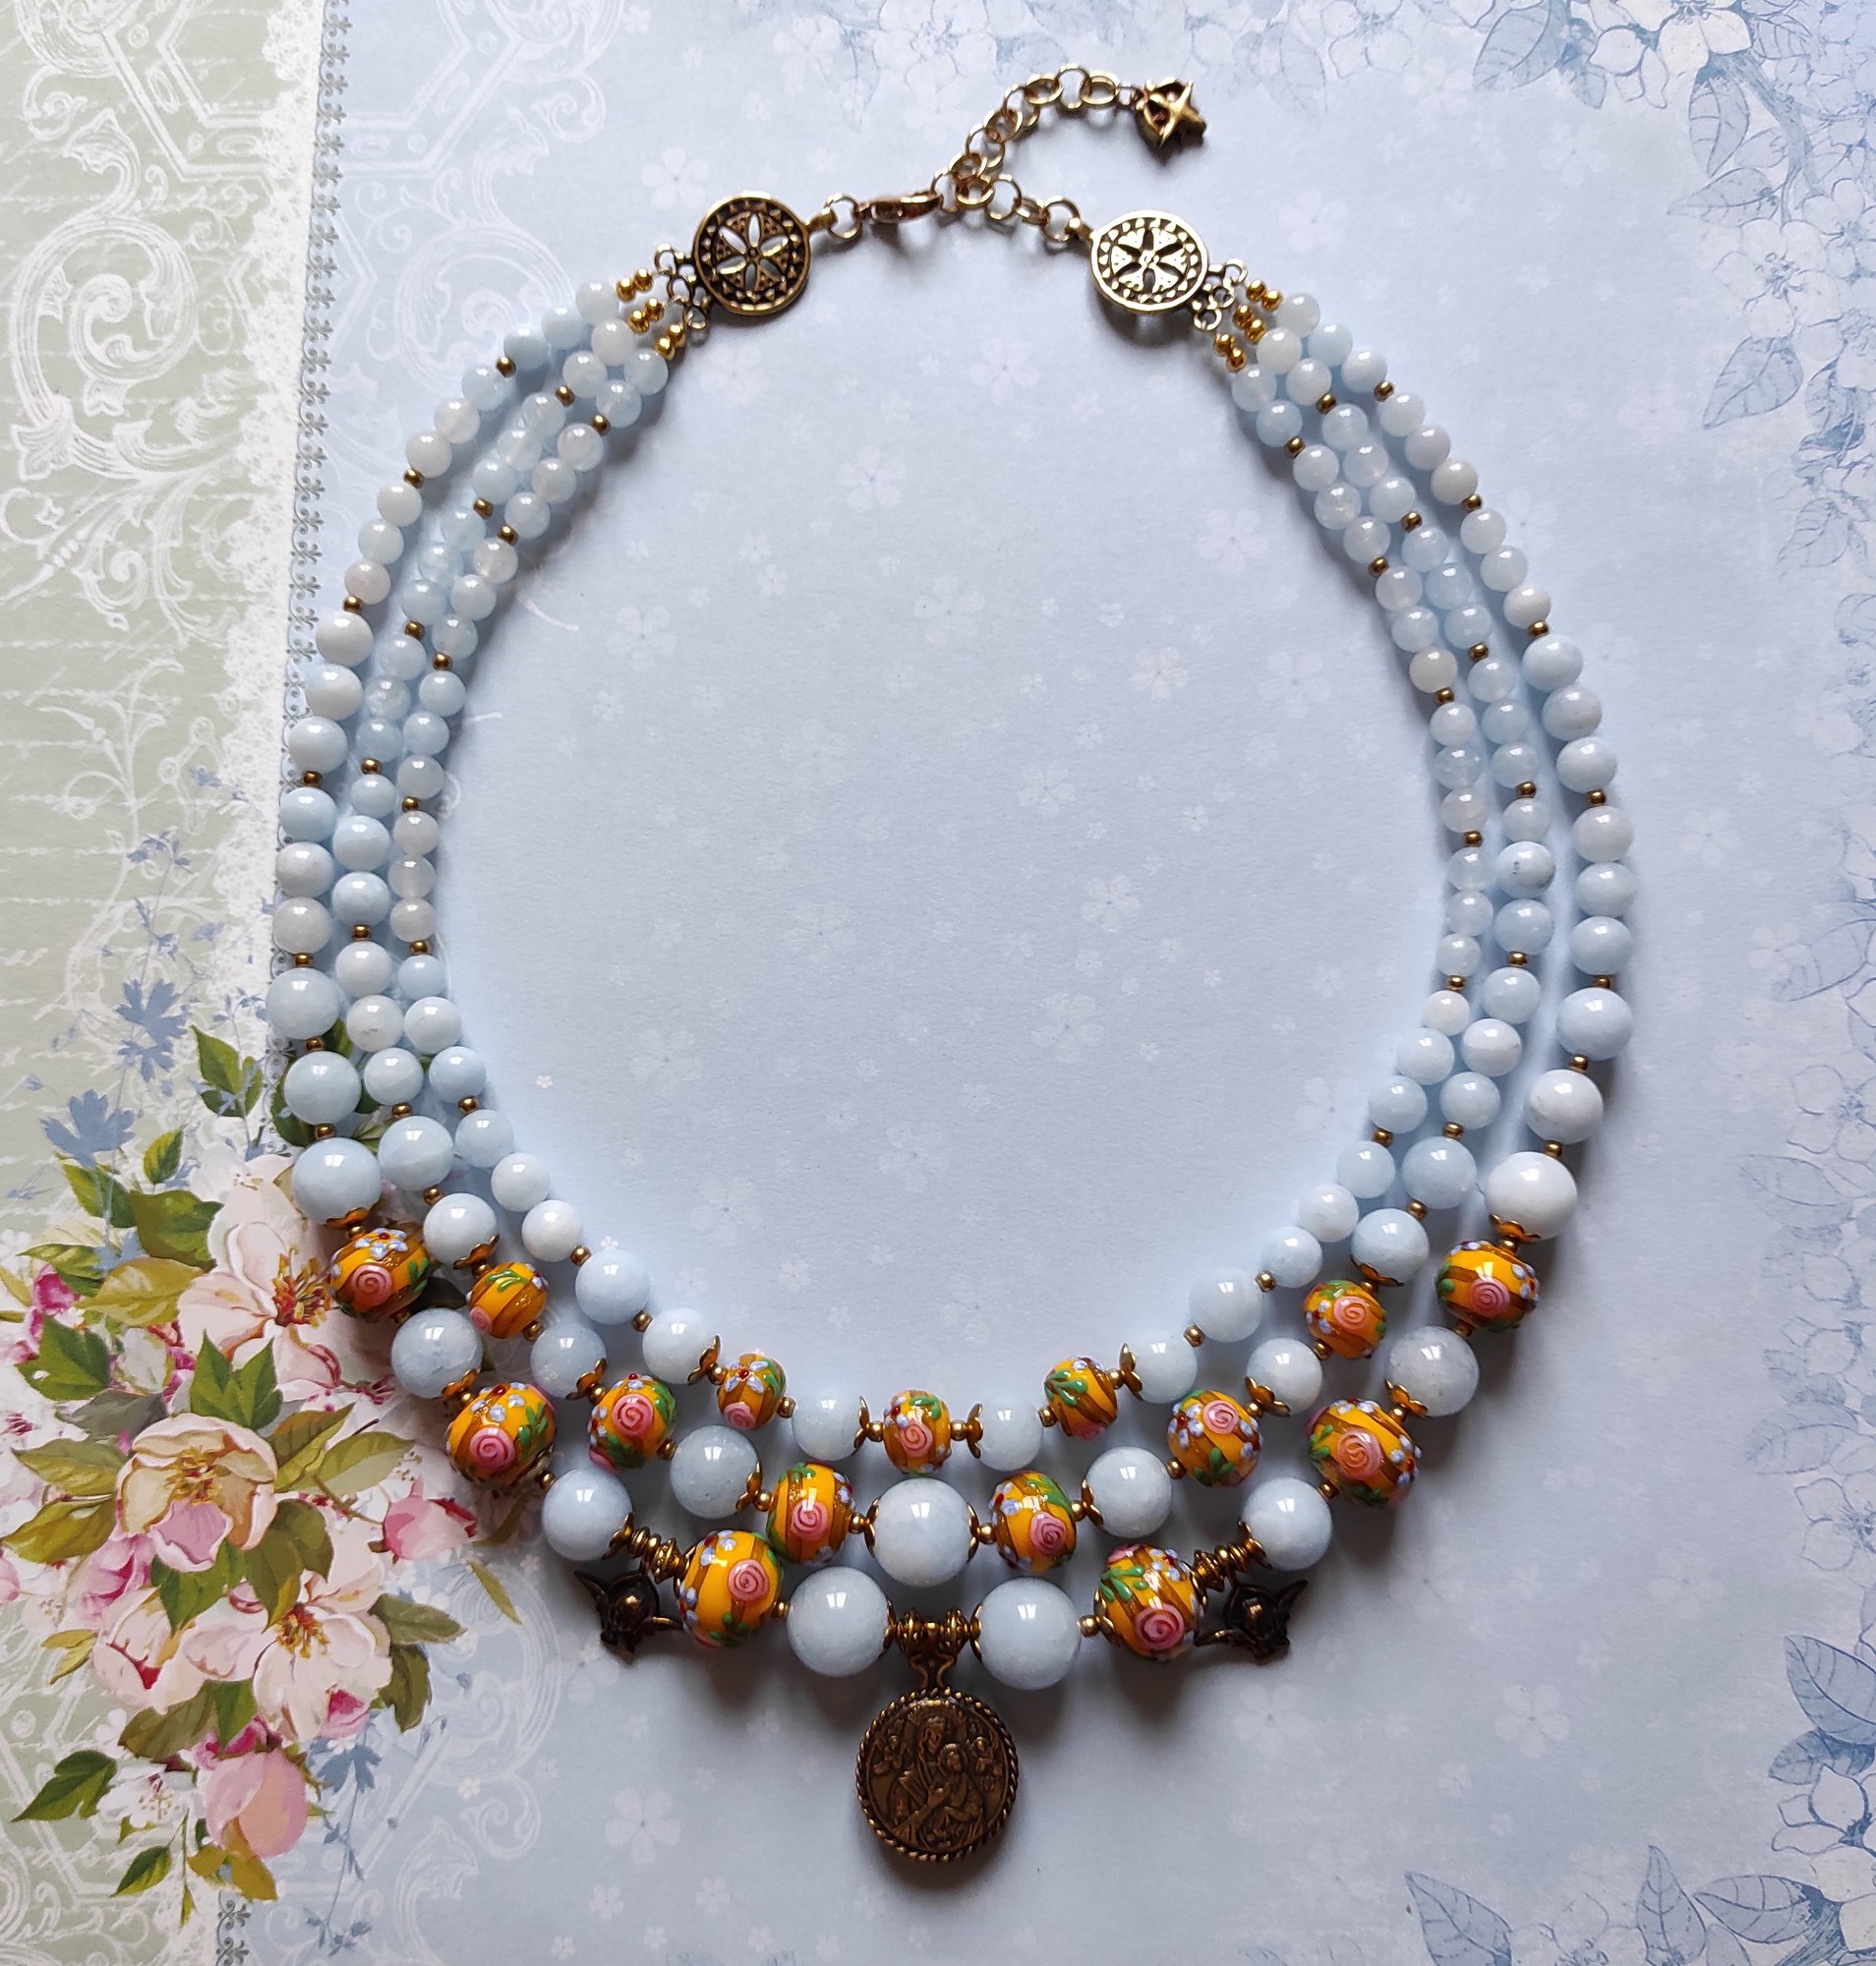 Necklace «Ukraine in bloom» from glass and aquamarine